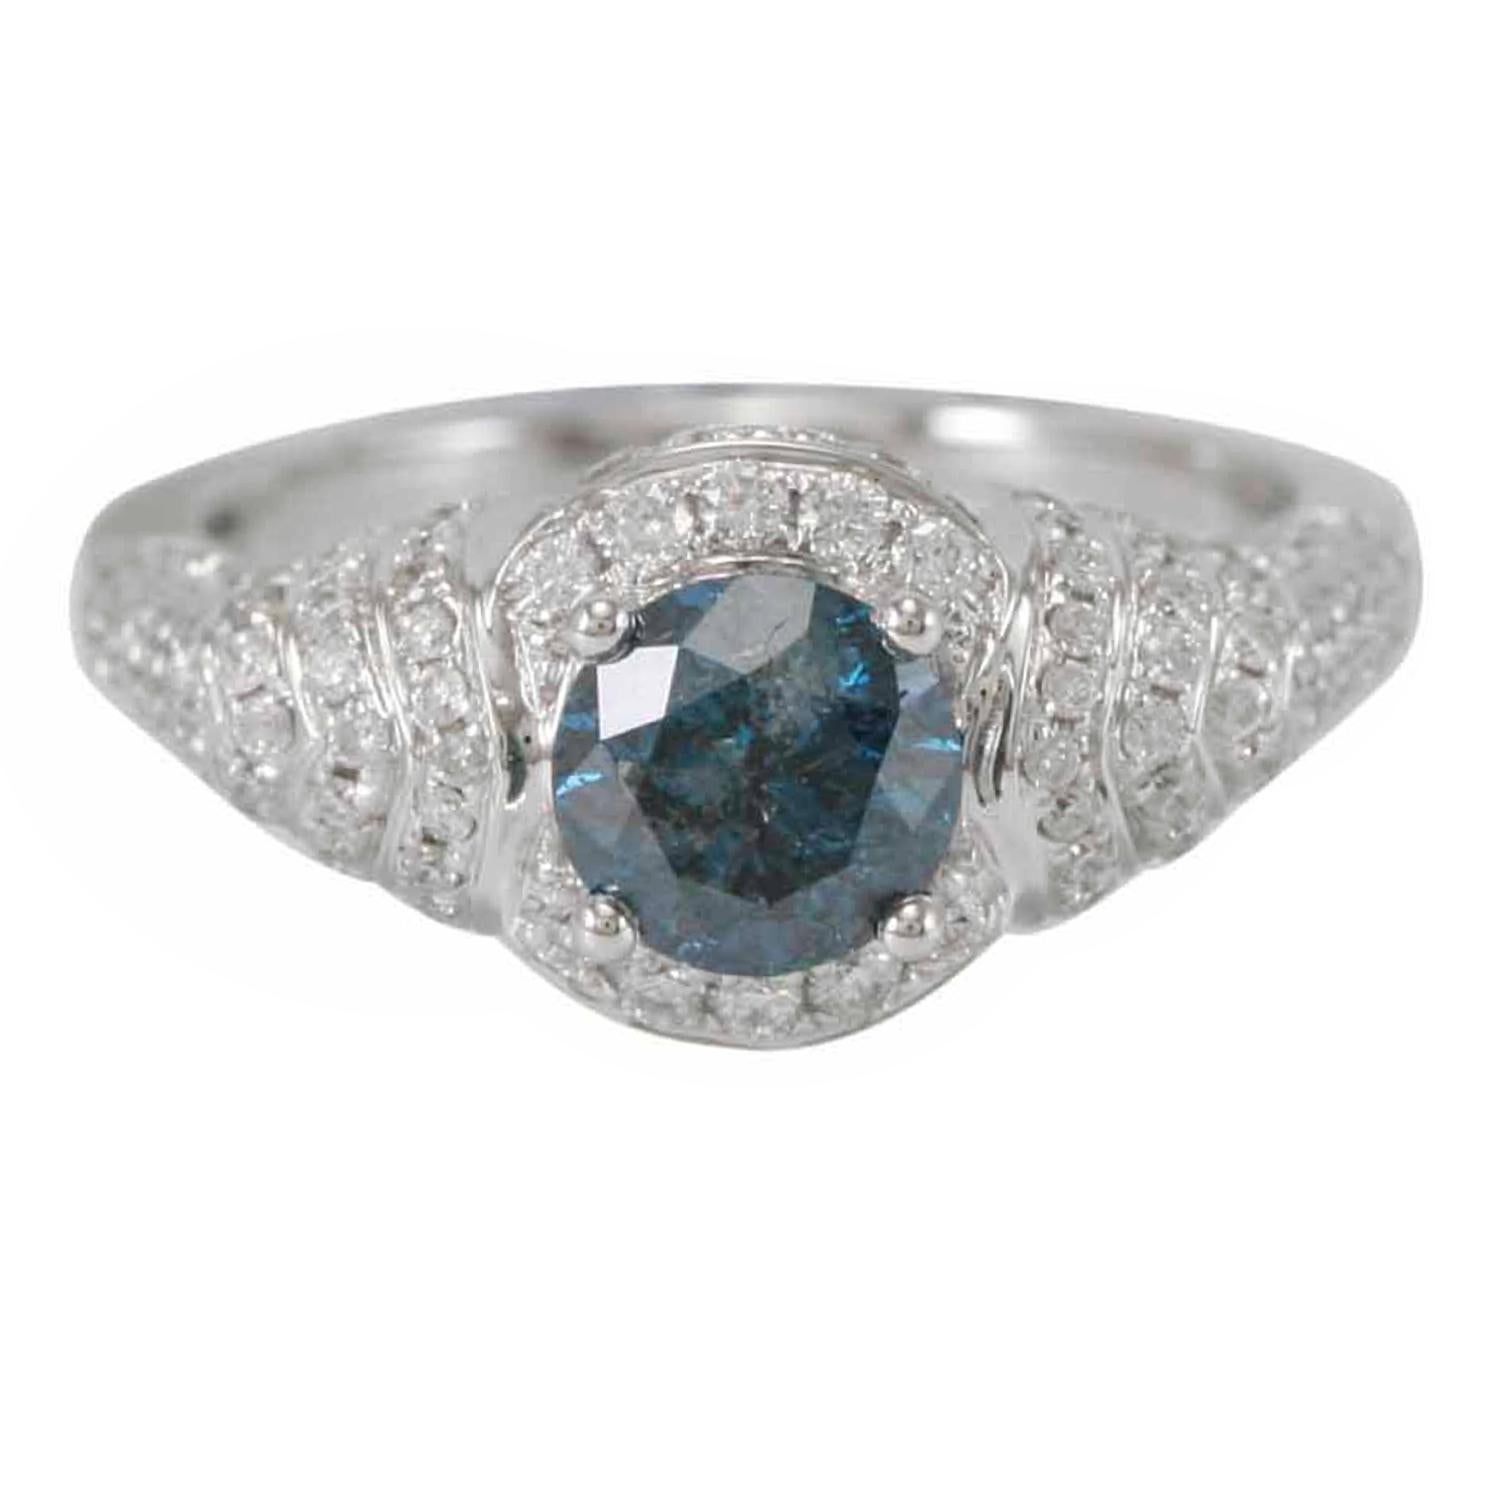 This stunning, one-of-a-kind ring from the Suzy Levian Limited Edition collection features a gorgeous round-cut, blue diamond (1.00ct) center stone with an array of white diamond (.79cttw) accents, handset in a 14k white gold setting. French